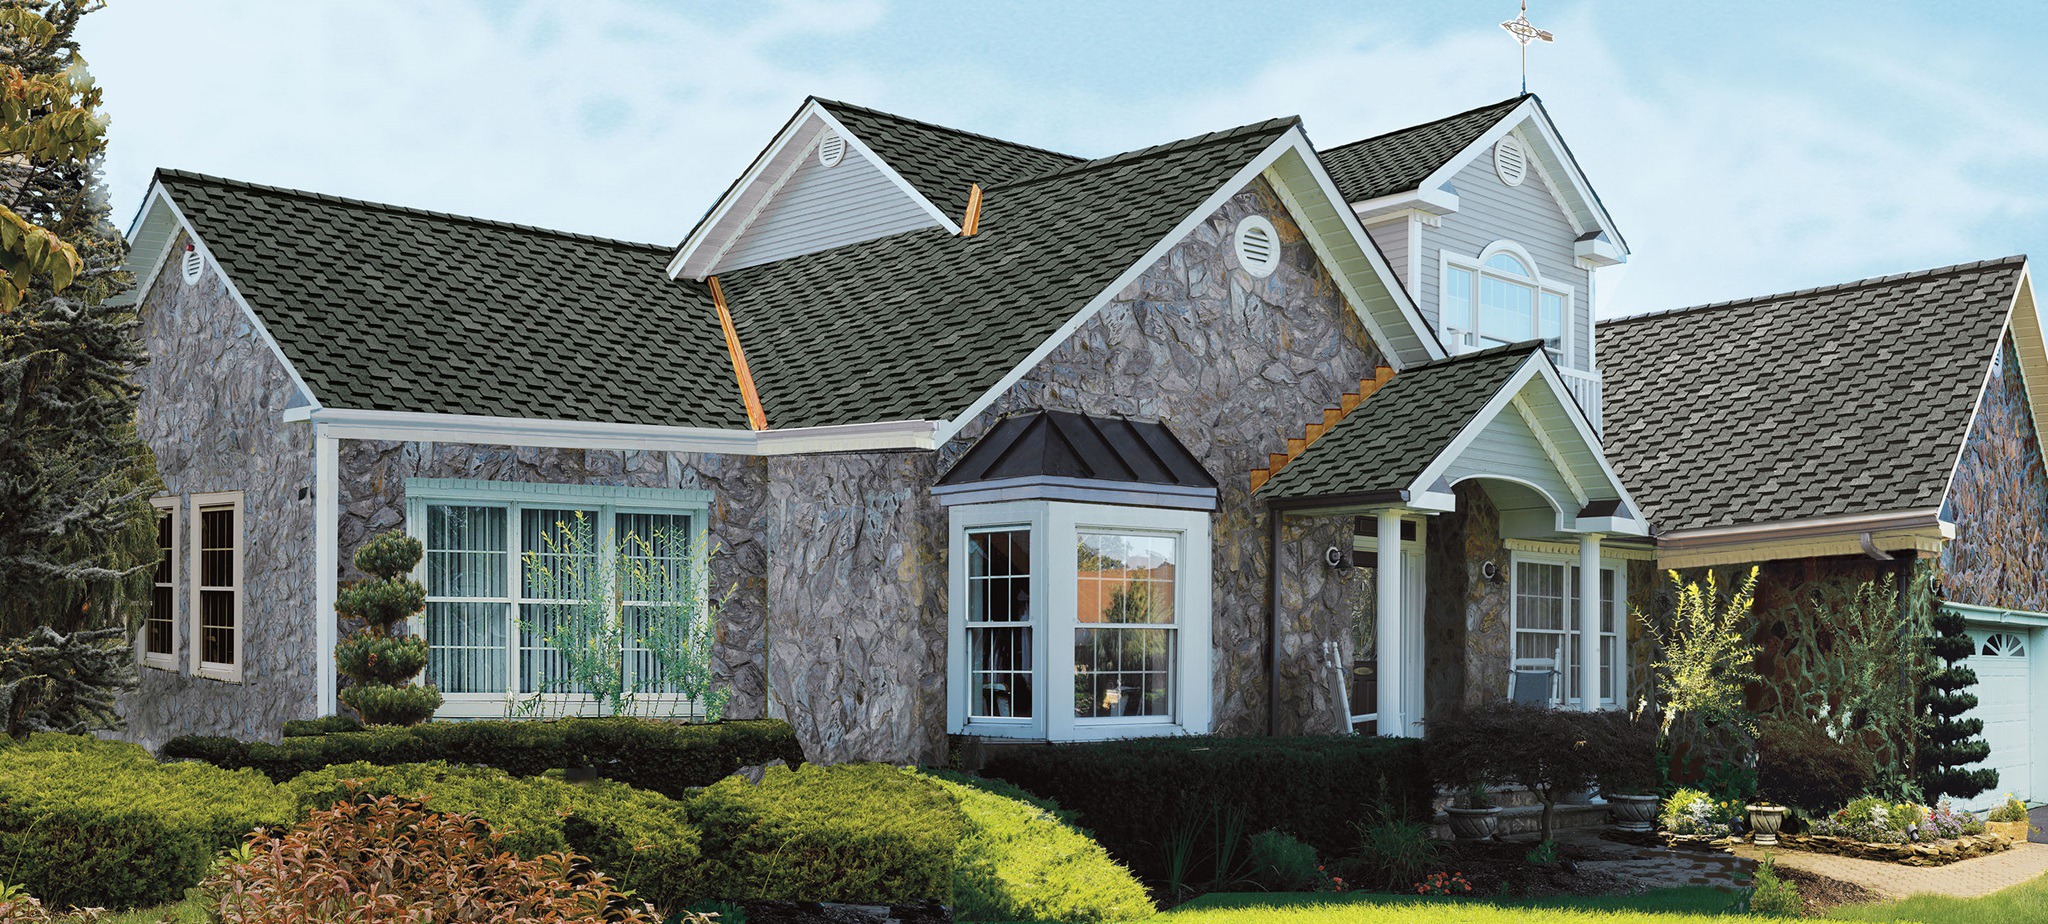 Synthetic Roofing Shingles – Built Stronger to Last Longer!